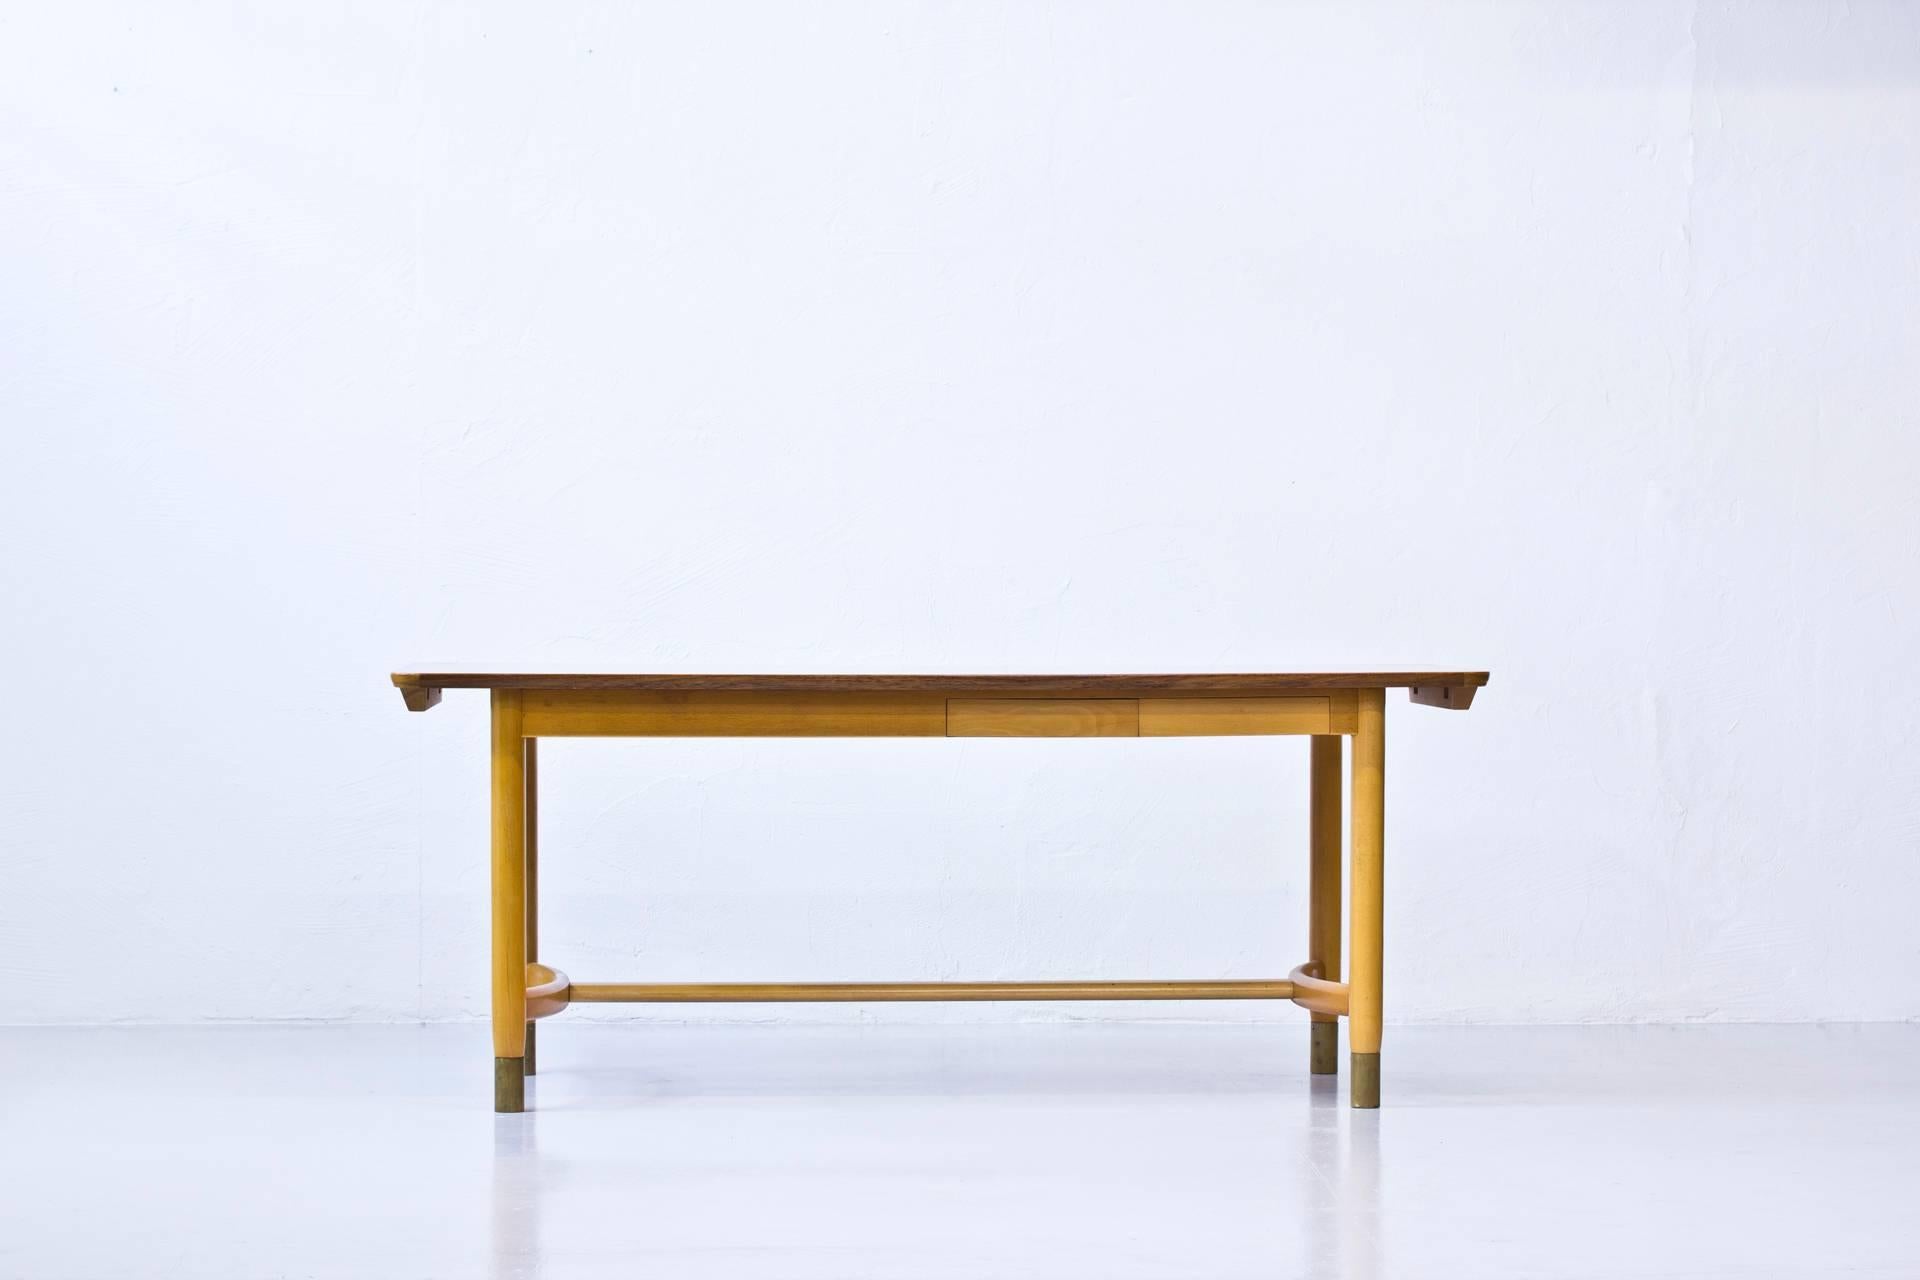 Unique dining table designed by Swedish interior architect Ralph Alton for the office at Ostervala Mobelfabrik in Sweden. The table was also produced at Ostervala Mobelfabrik. Solid beech frame with brass endings. Teak table top with two Dutch style